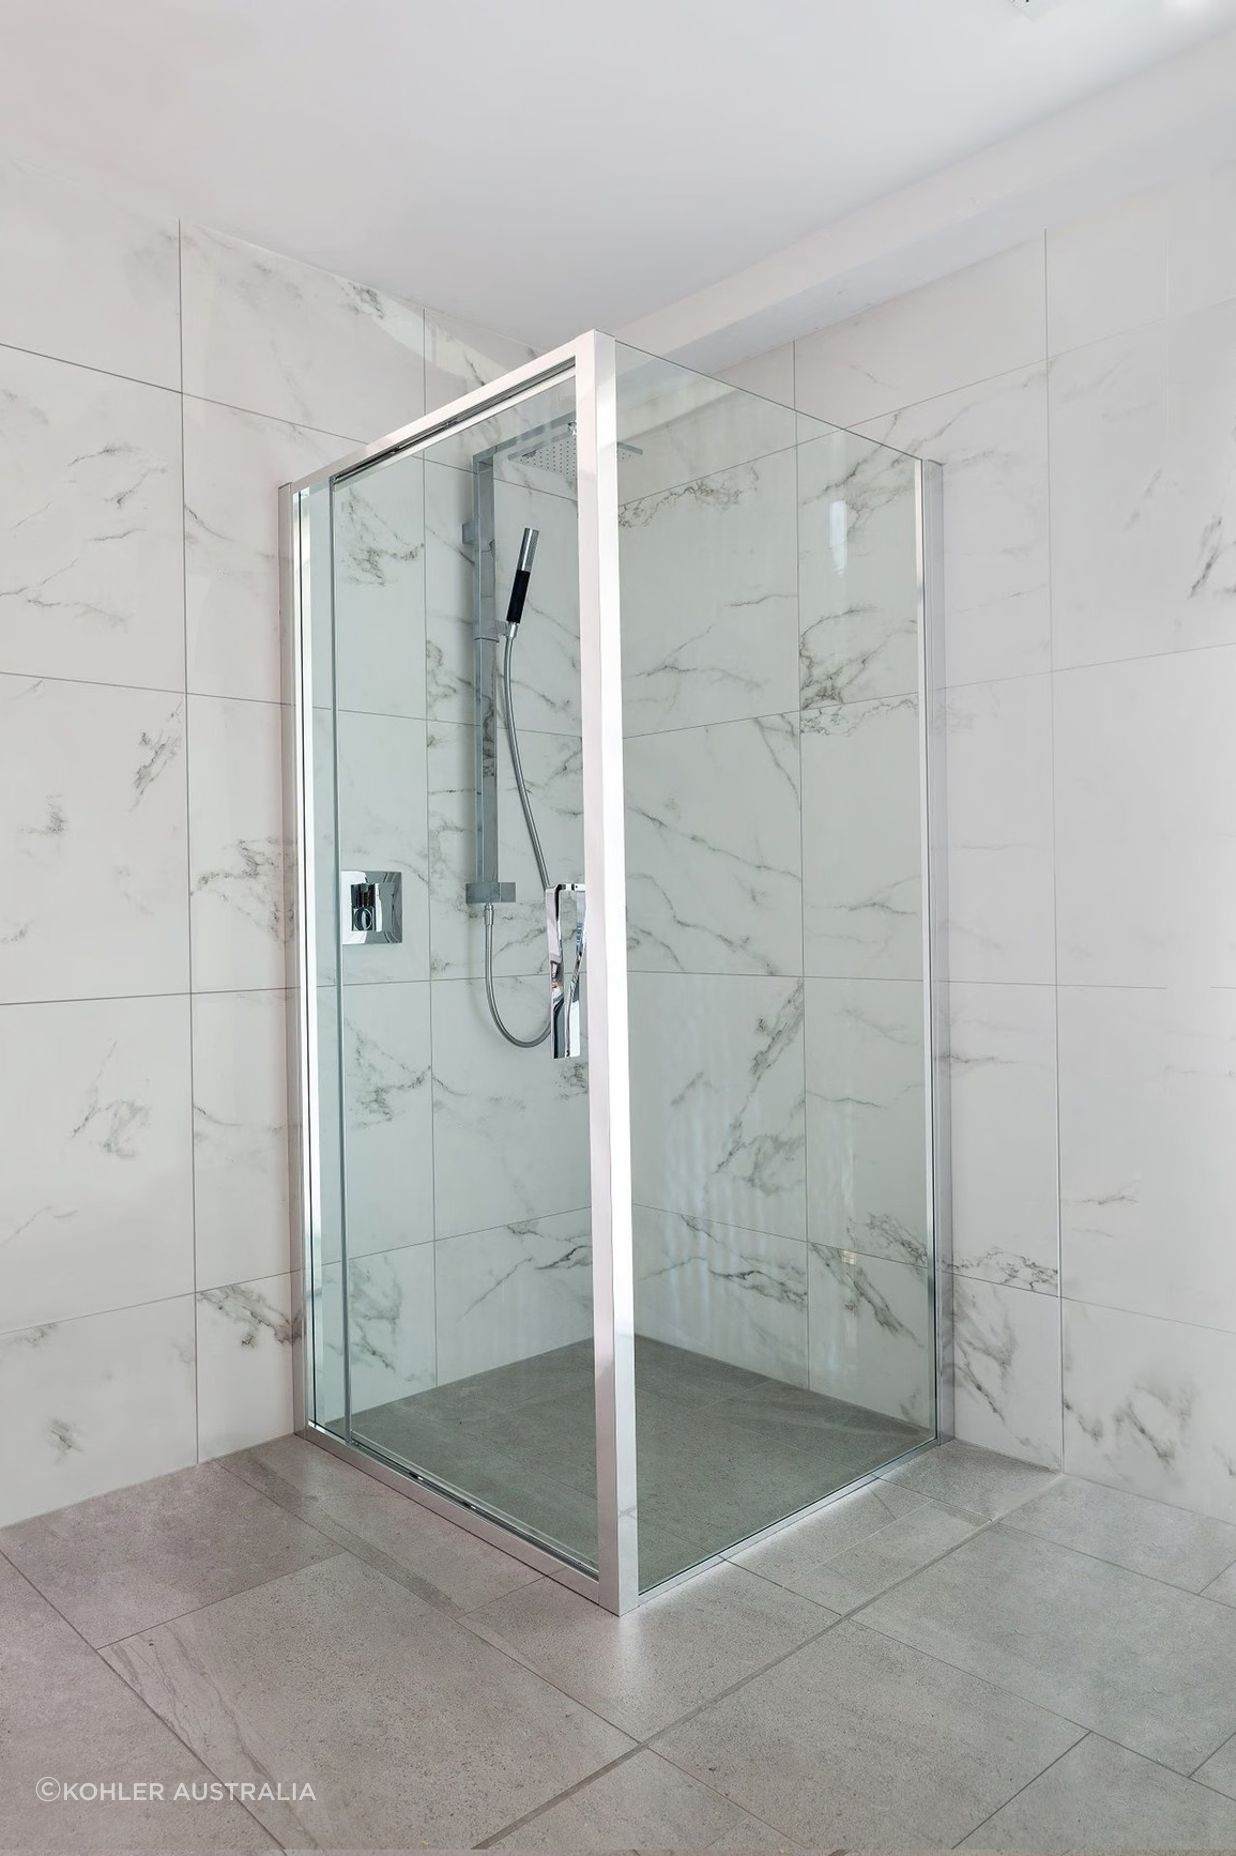 Pivot door shower screens can open inward or outward, depending on the positioning of the mechanism and hinge. Featured product: Torsion Square Corner Inswing Shower.